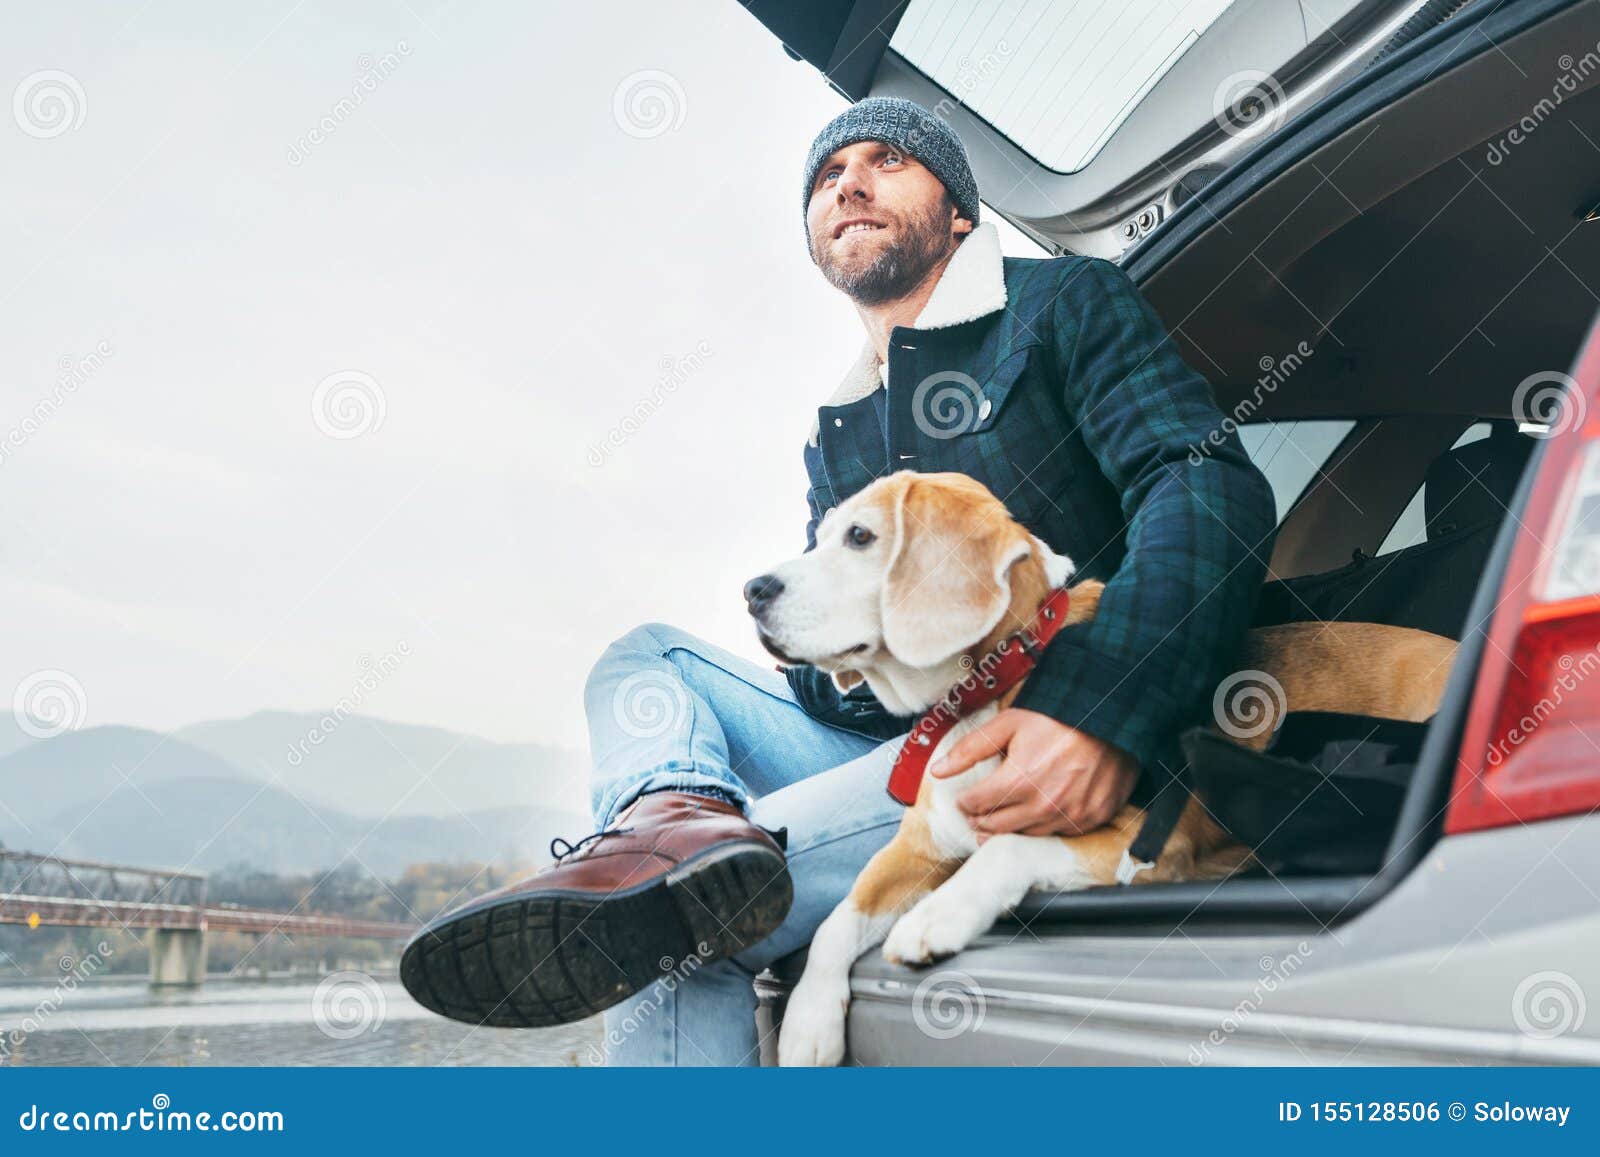 man with beagle dog siting together in car trunk